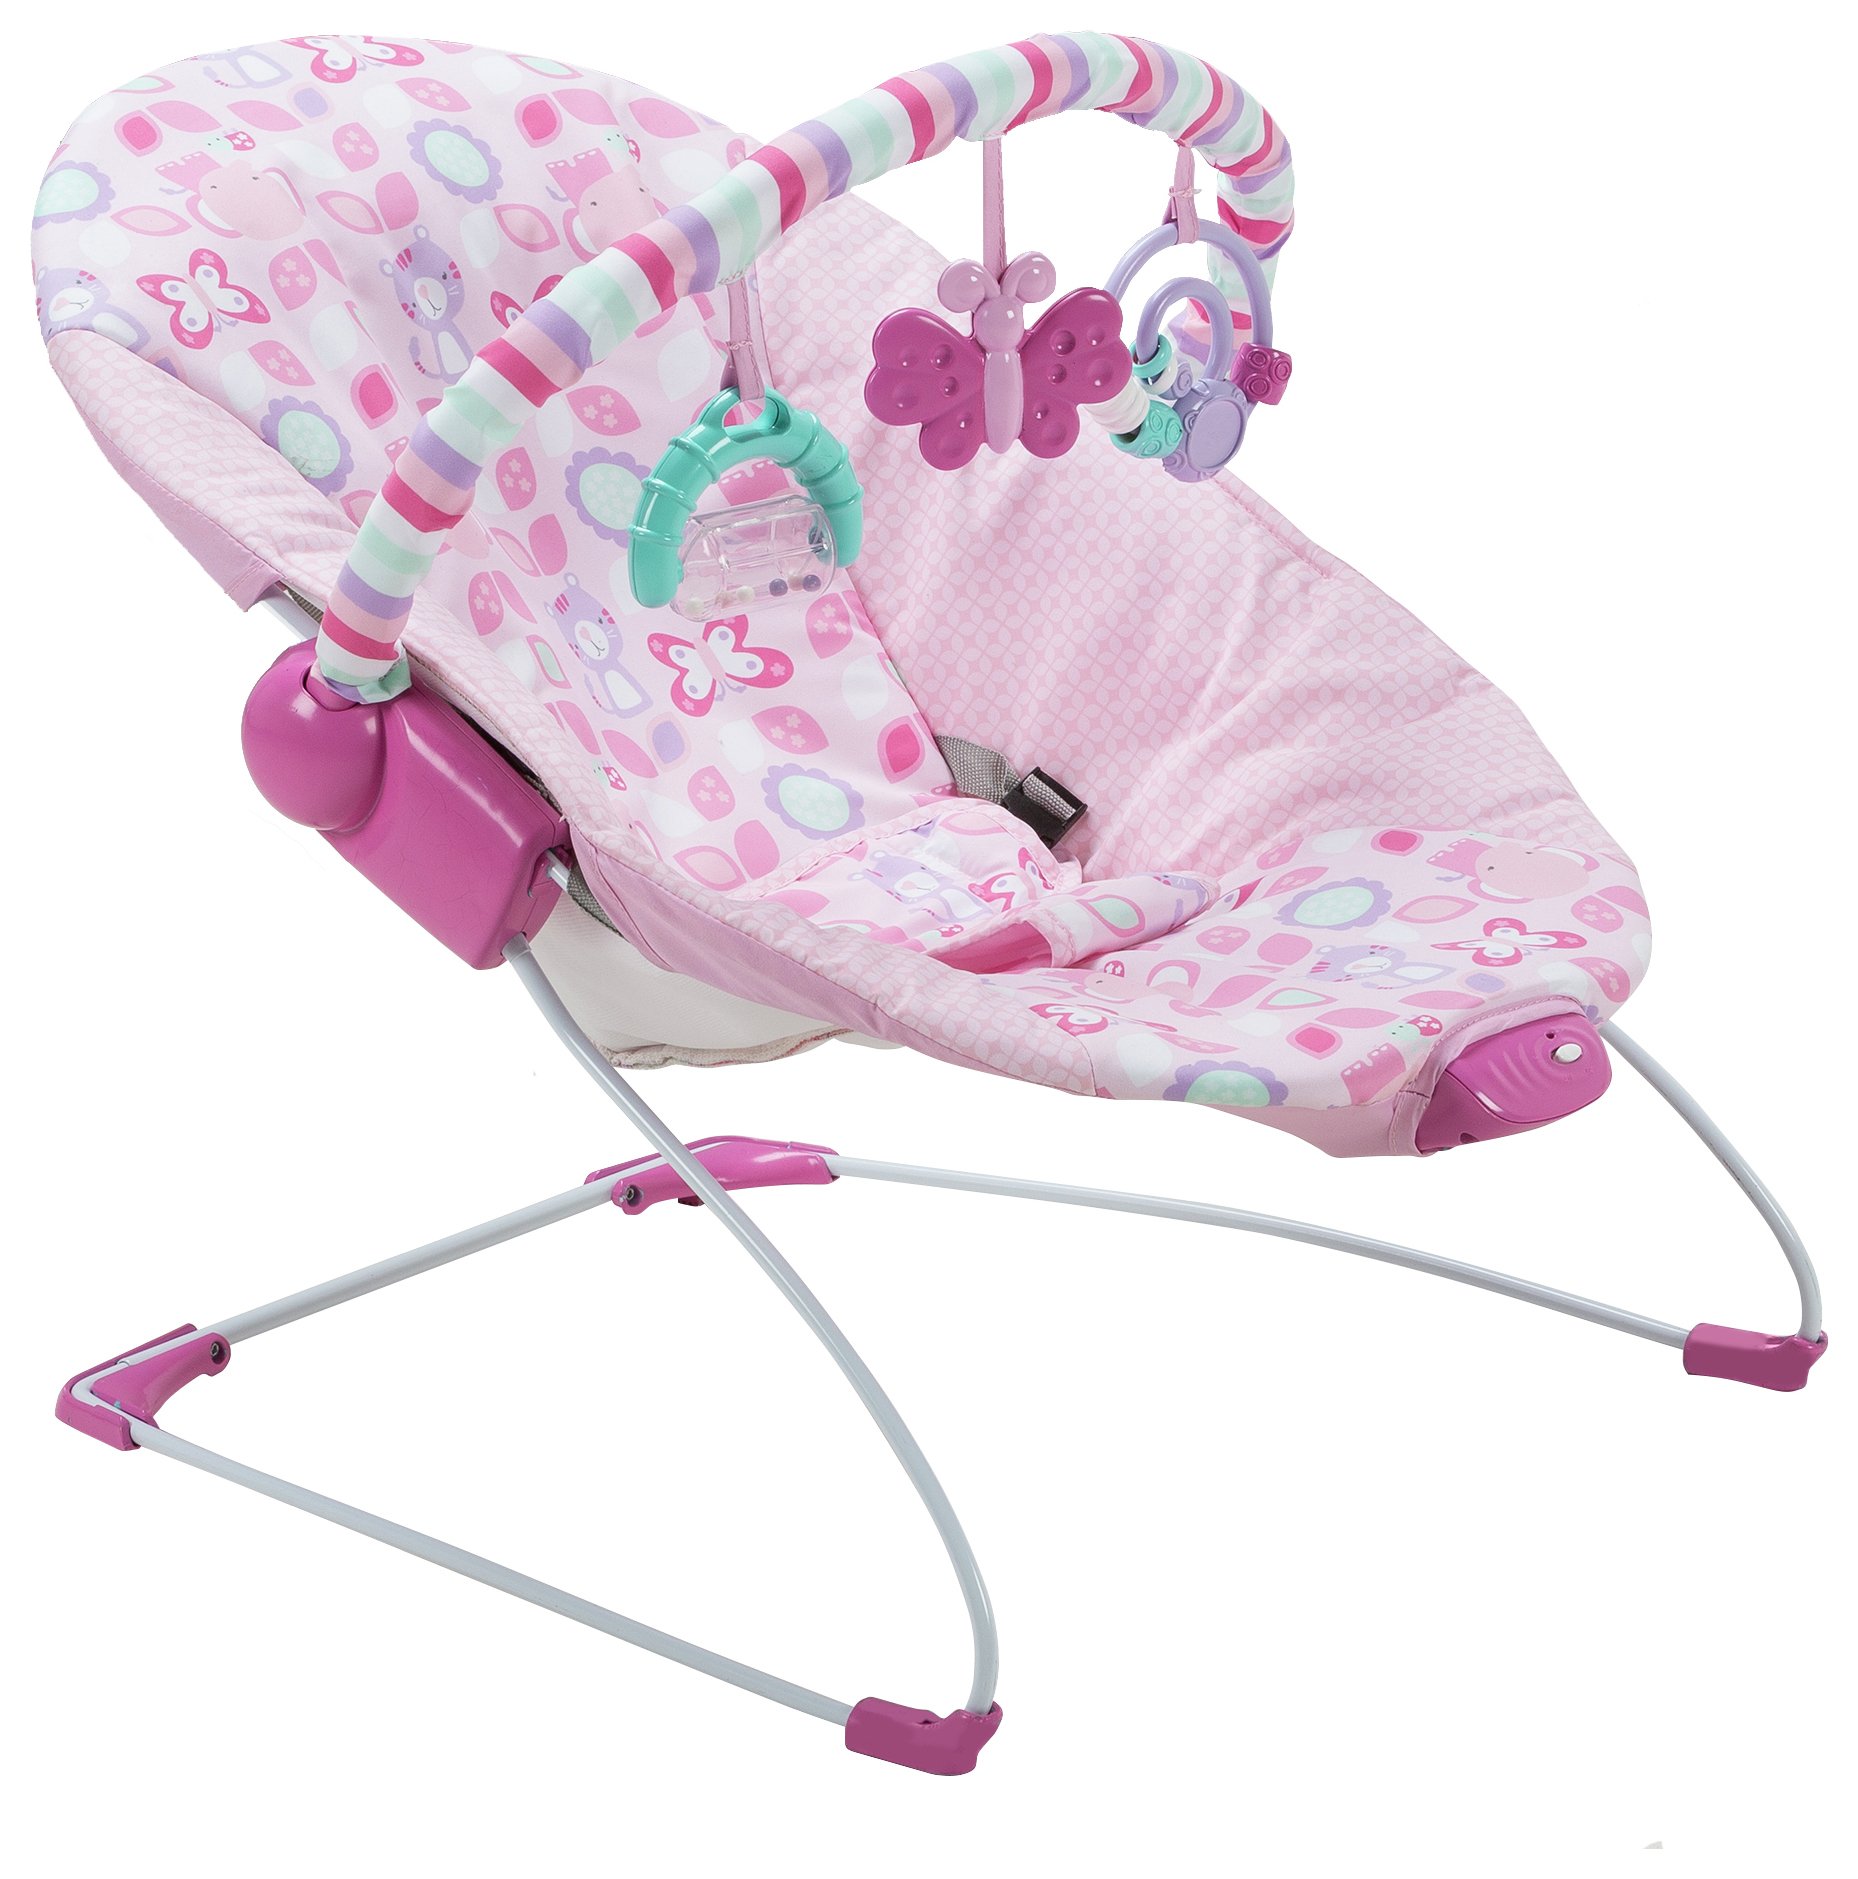 Chad Valley Friends Deluxe Bouncer - Pink